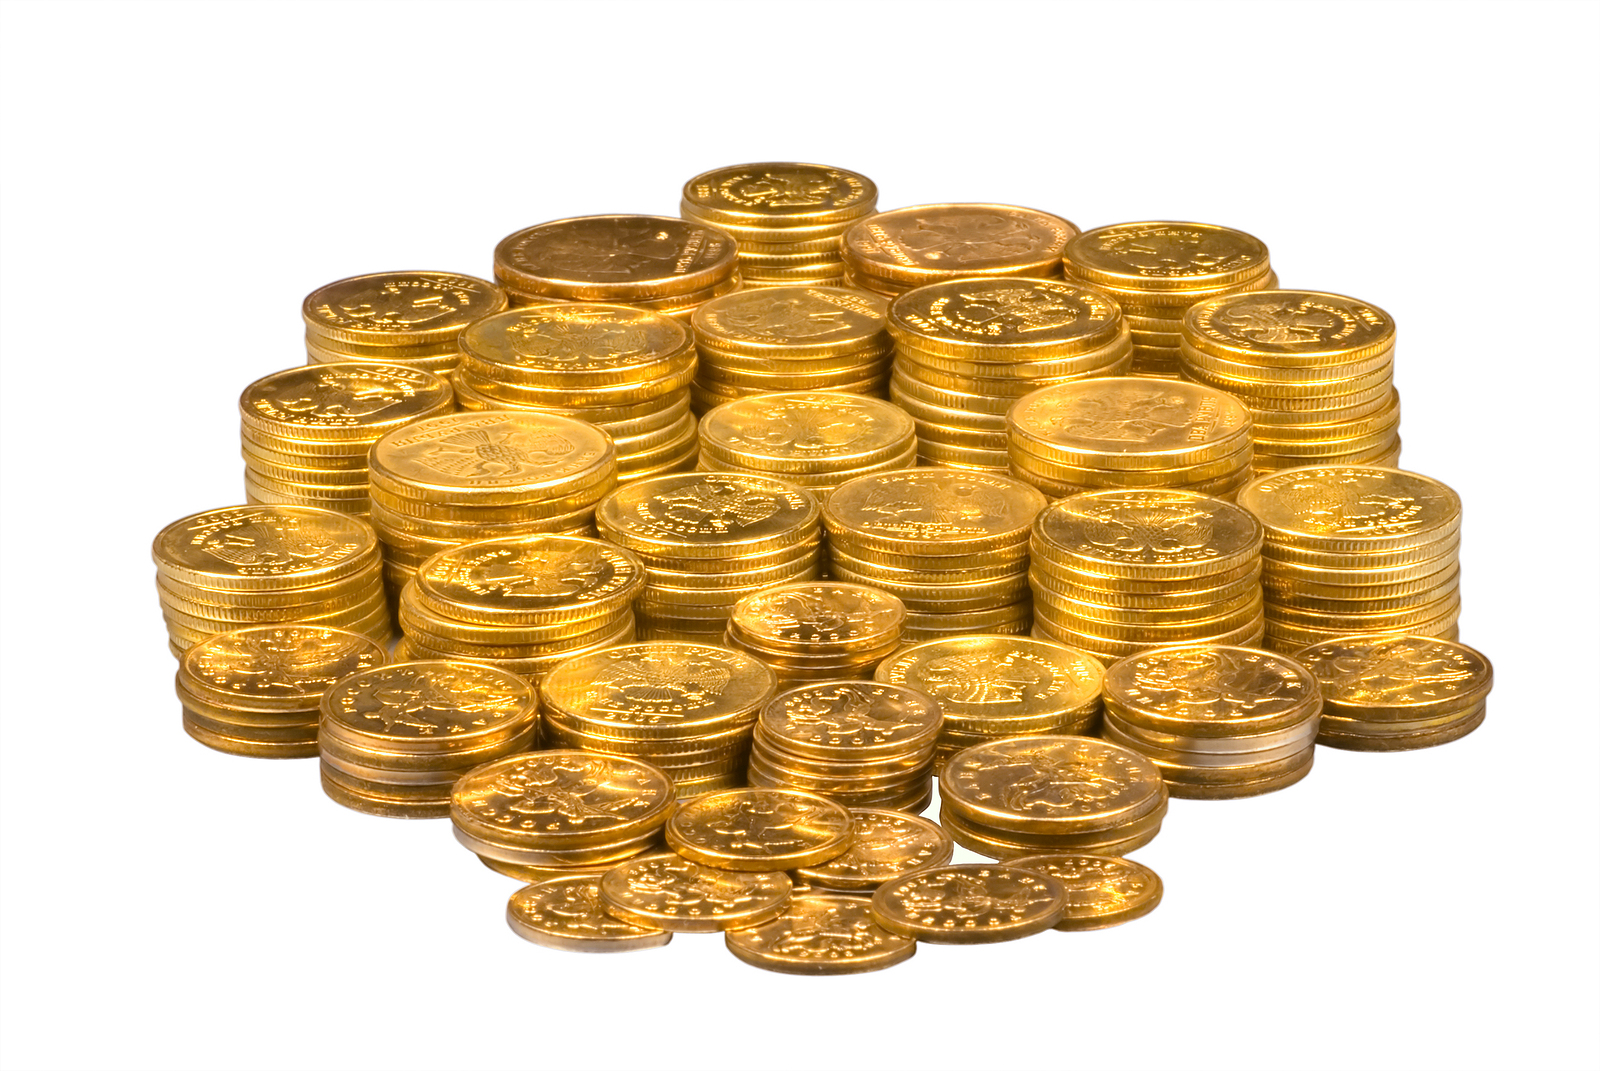 Group of gold coins isolated over white background with clipping path